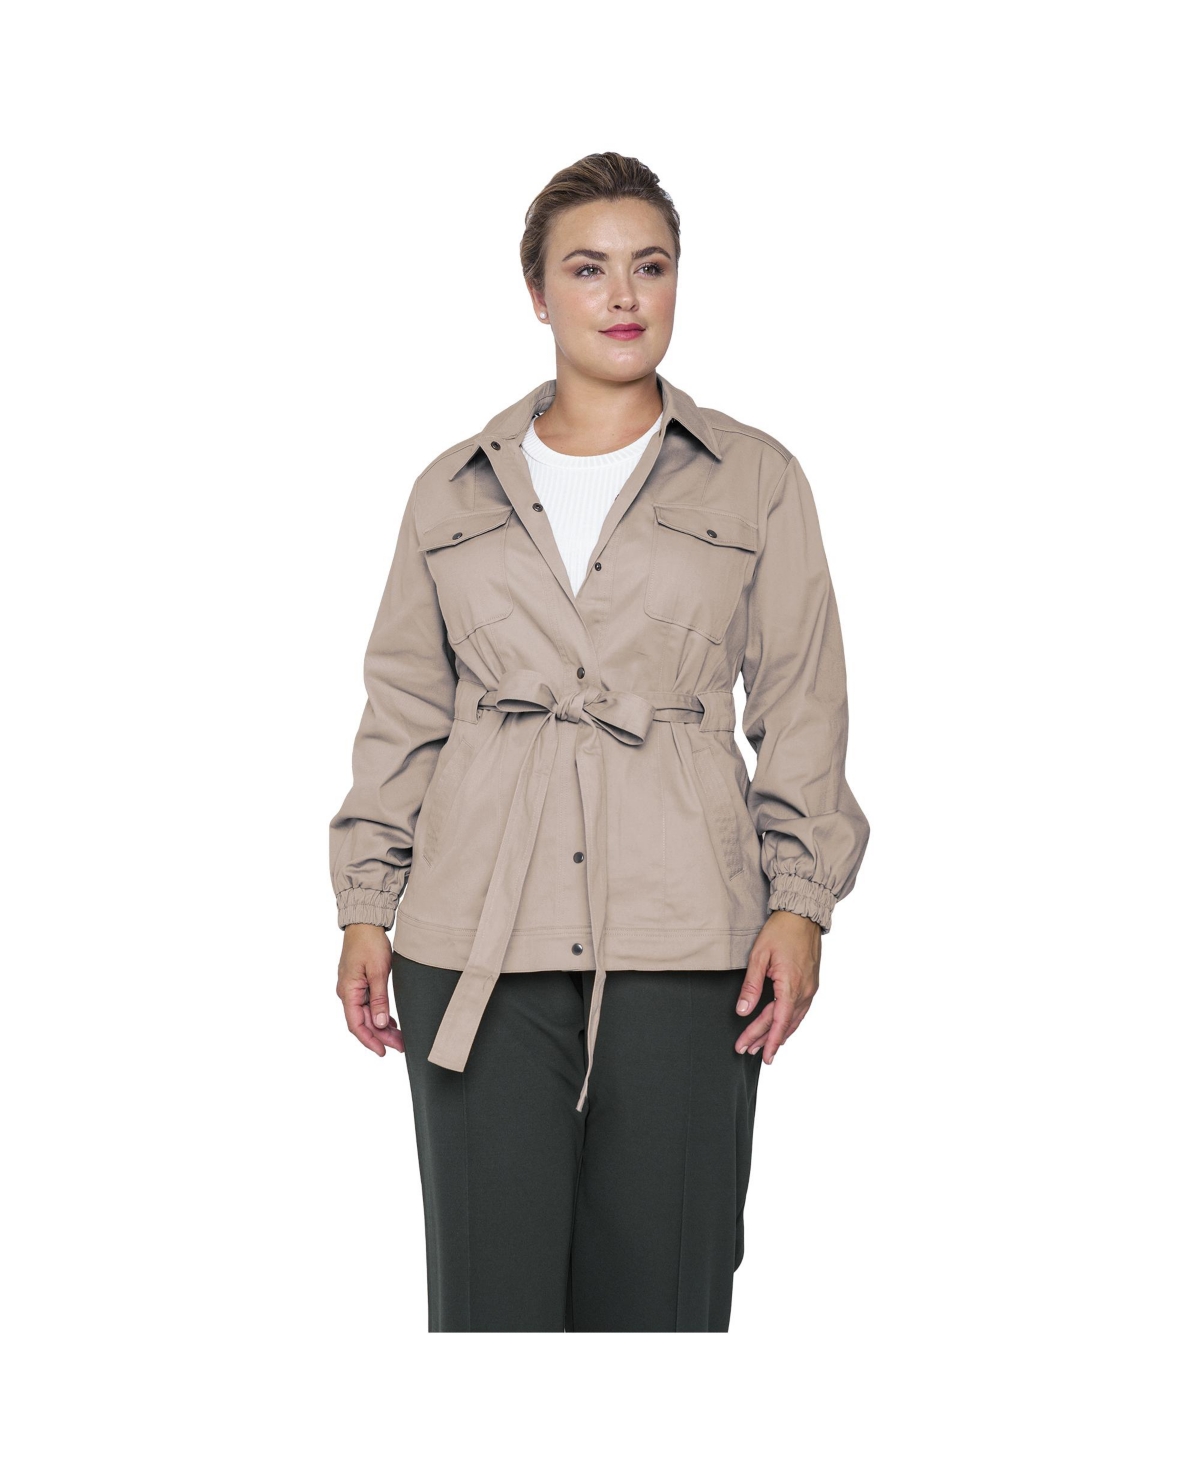 Women's Plus Size Snap Front Utility Anorak Jacket - Curry